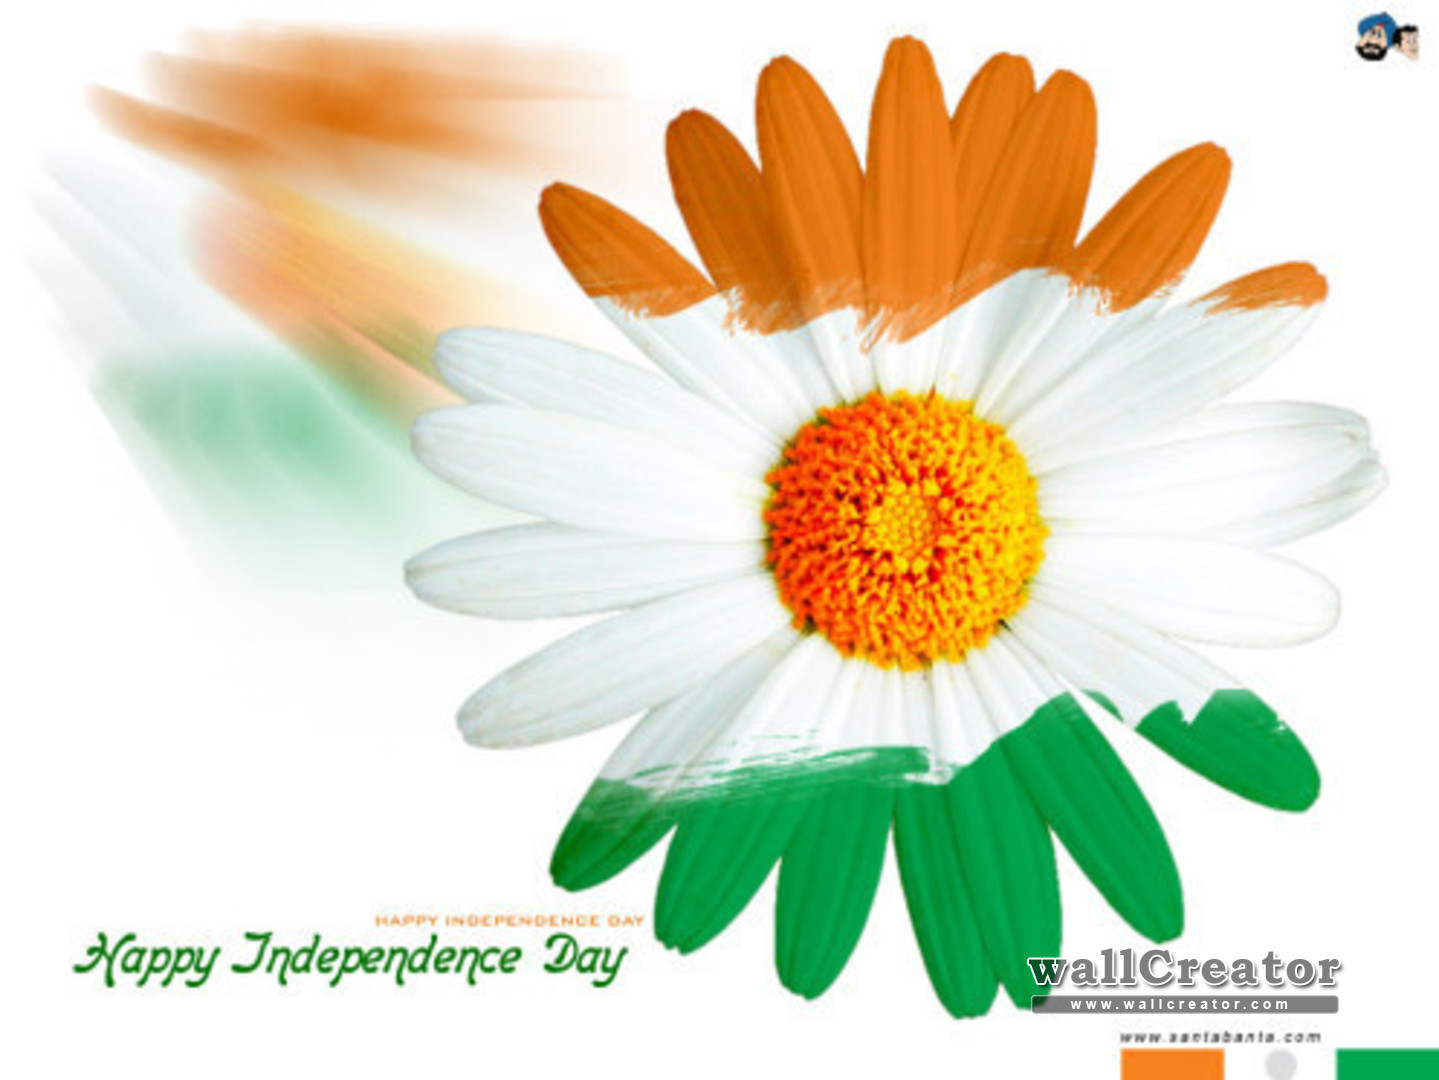 Mohamed Ismail - Independence Day Whatsapp Dp - HD Wallpaper 